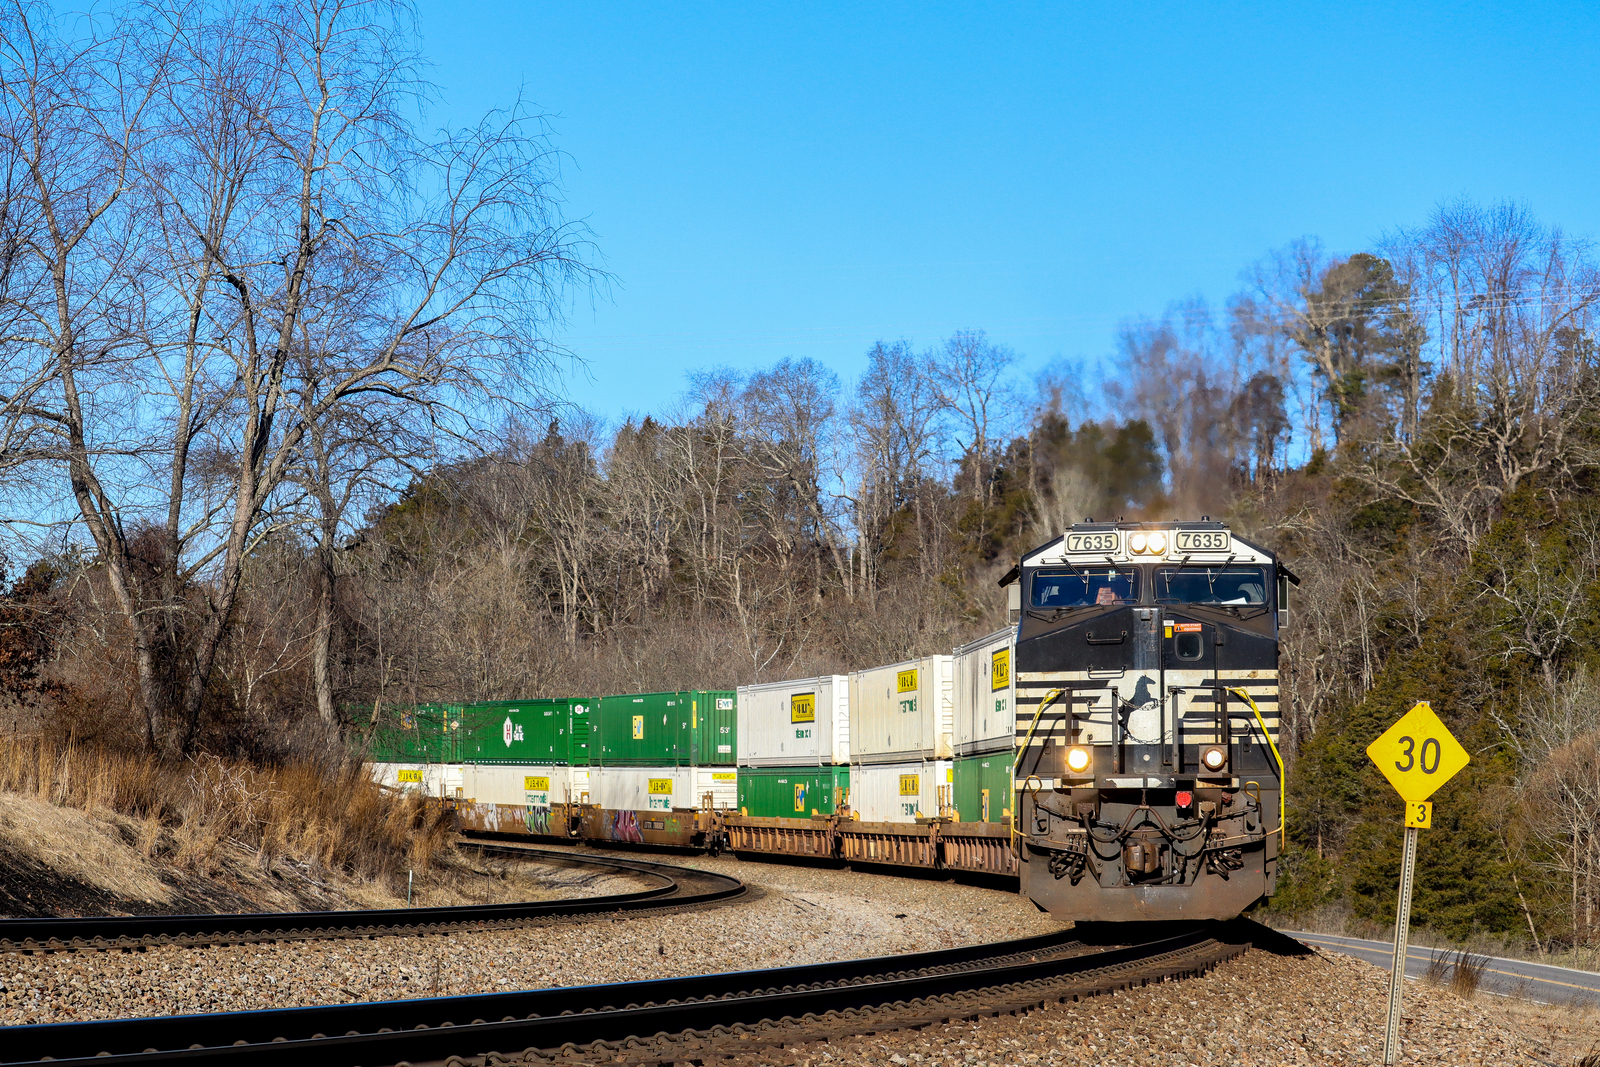 NS 7635 is a class GE ES44DC and  is pictured in Christiansburg, Virginia, USA.  This was taken along the NS Christiansburg District  on the Norfolk Southern Railway. Photo Copyright: Robby Lefkowitz uploaded to Railroad Gallery on 02/20/2023. This photograph of NS 7635 was taken on Saturday, February 18, 2023. All Rights Reserved. 